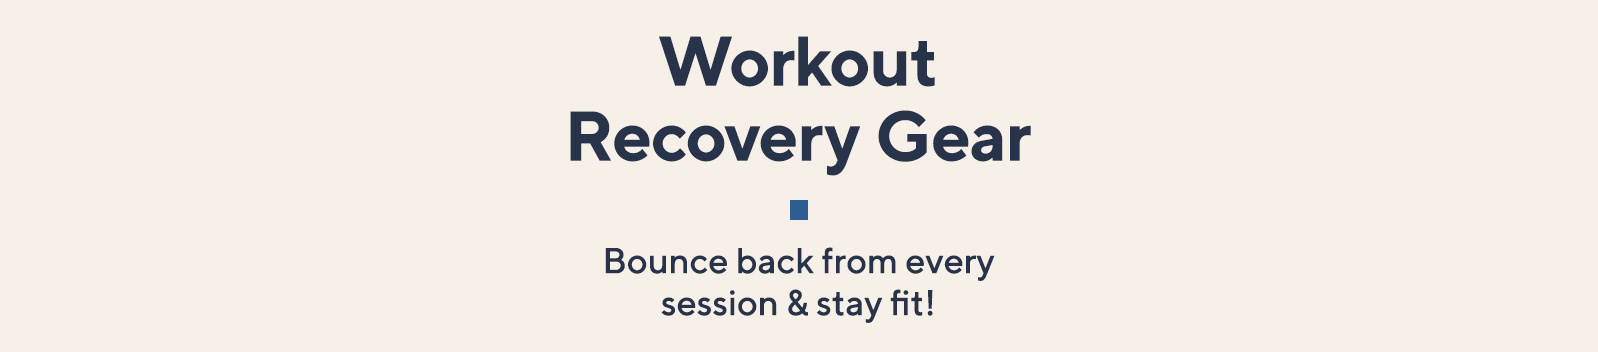 Workout Recovery Gear  Bounce back from every session & stay fit!